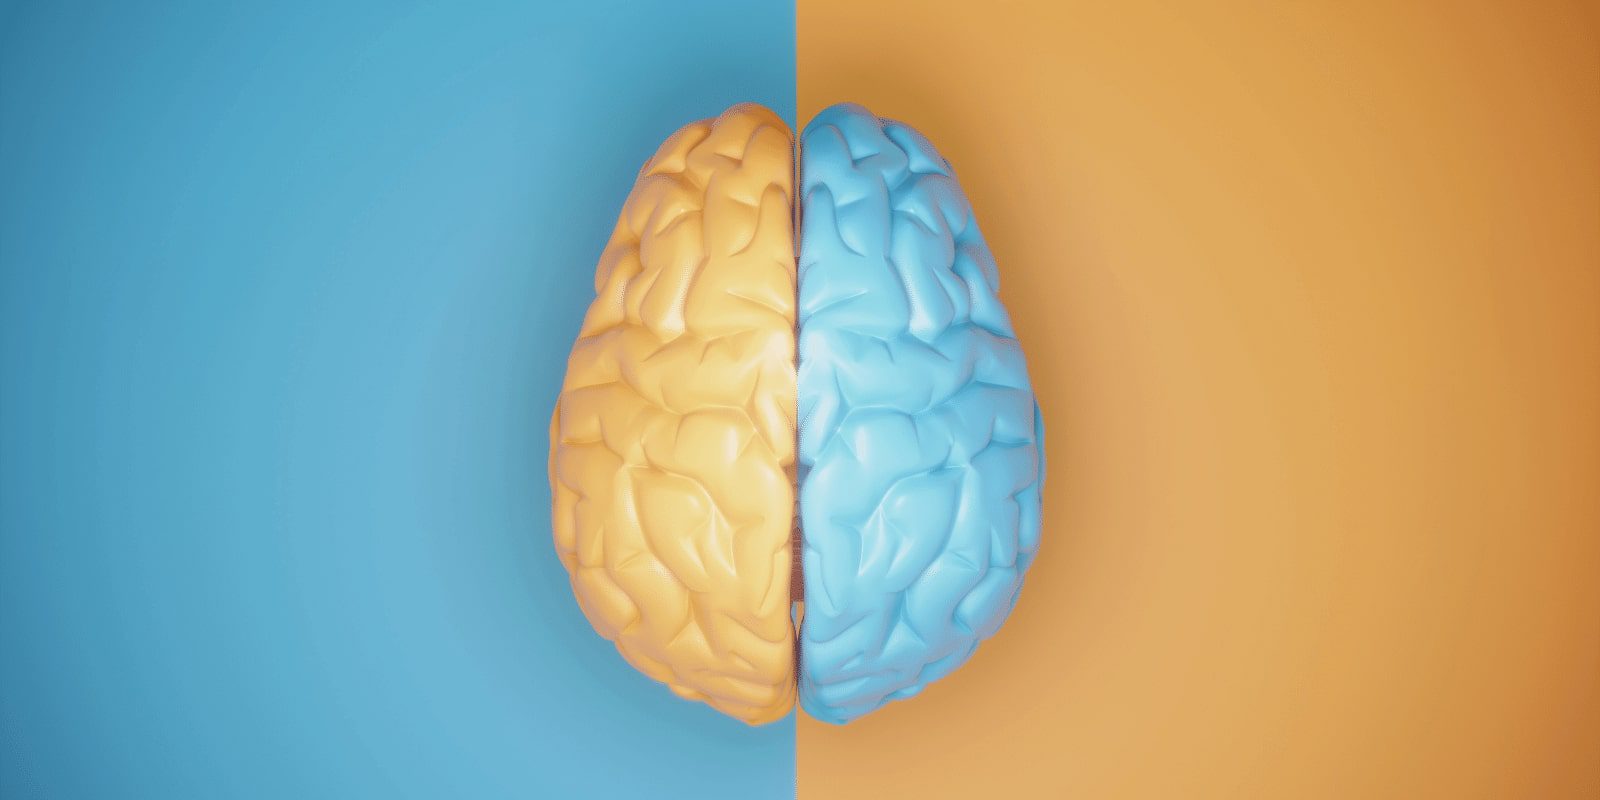 A 3D constructed brain, yellow colored left and blue colored right each on blue and yellow background